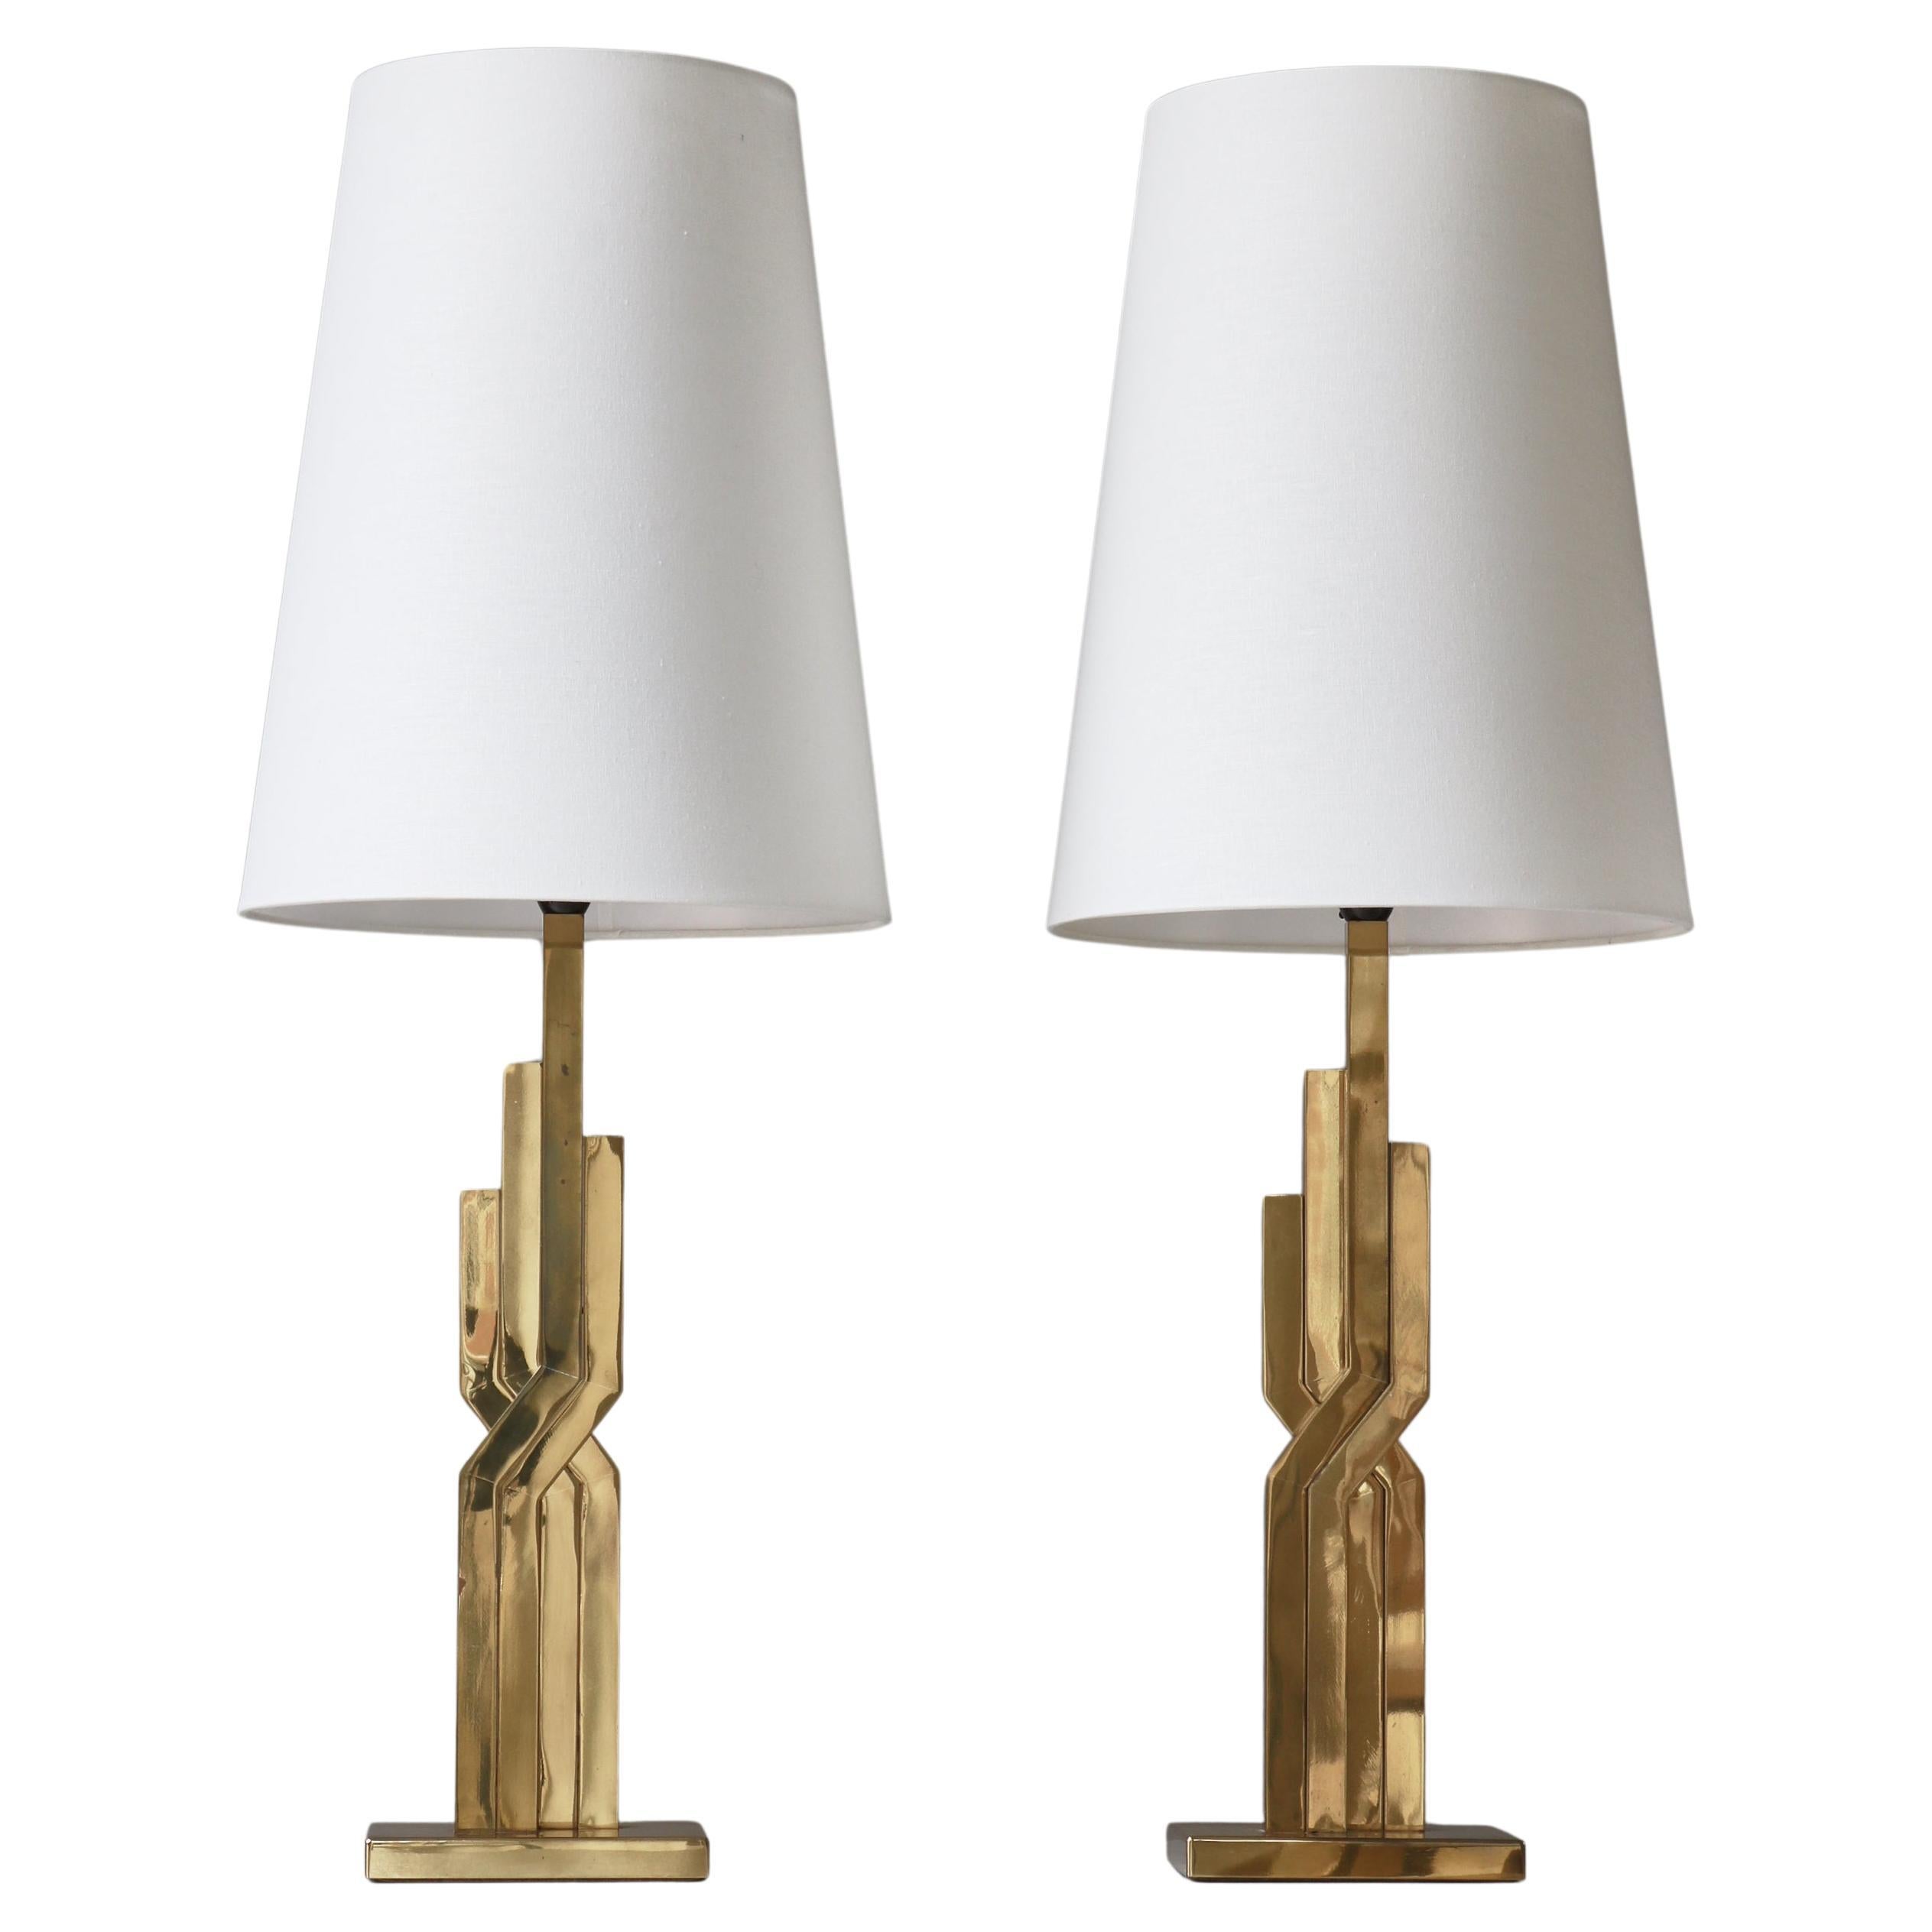 Large Danish Modern Table Lamps in Brass by Svend Aage Holm-Sørensen, 1960s